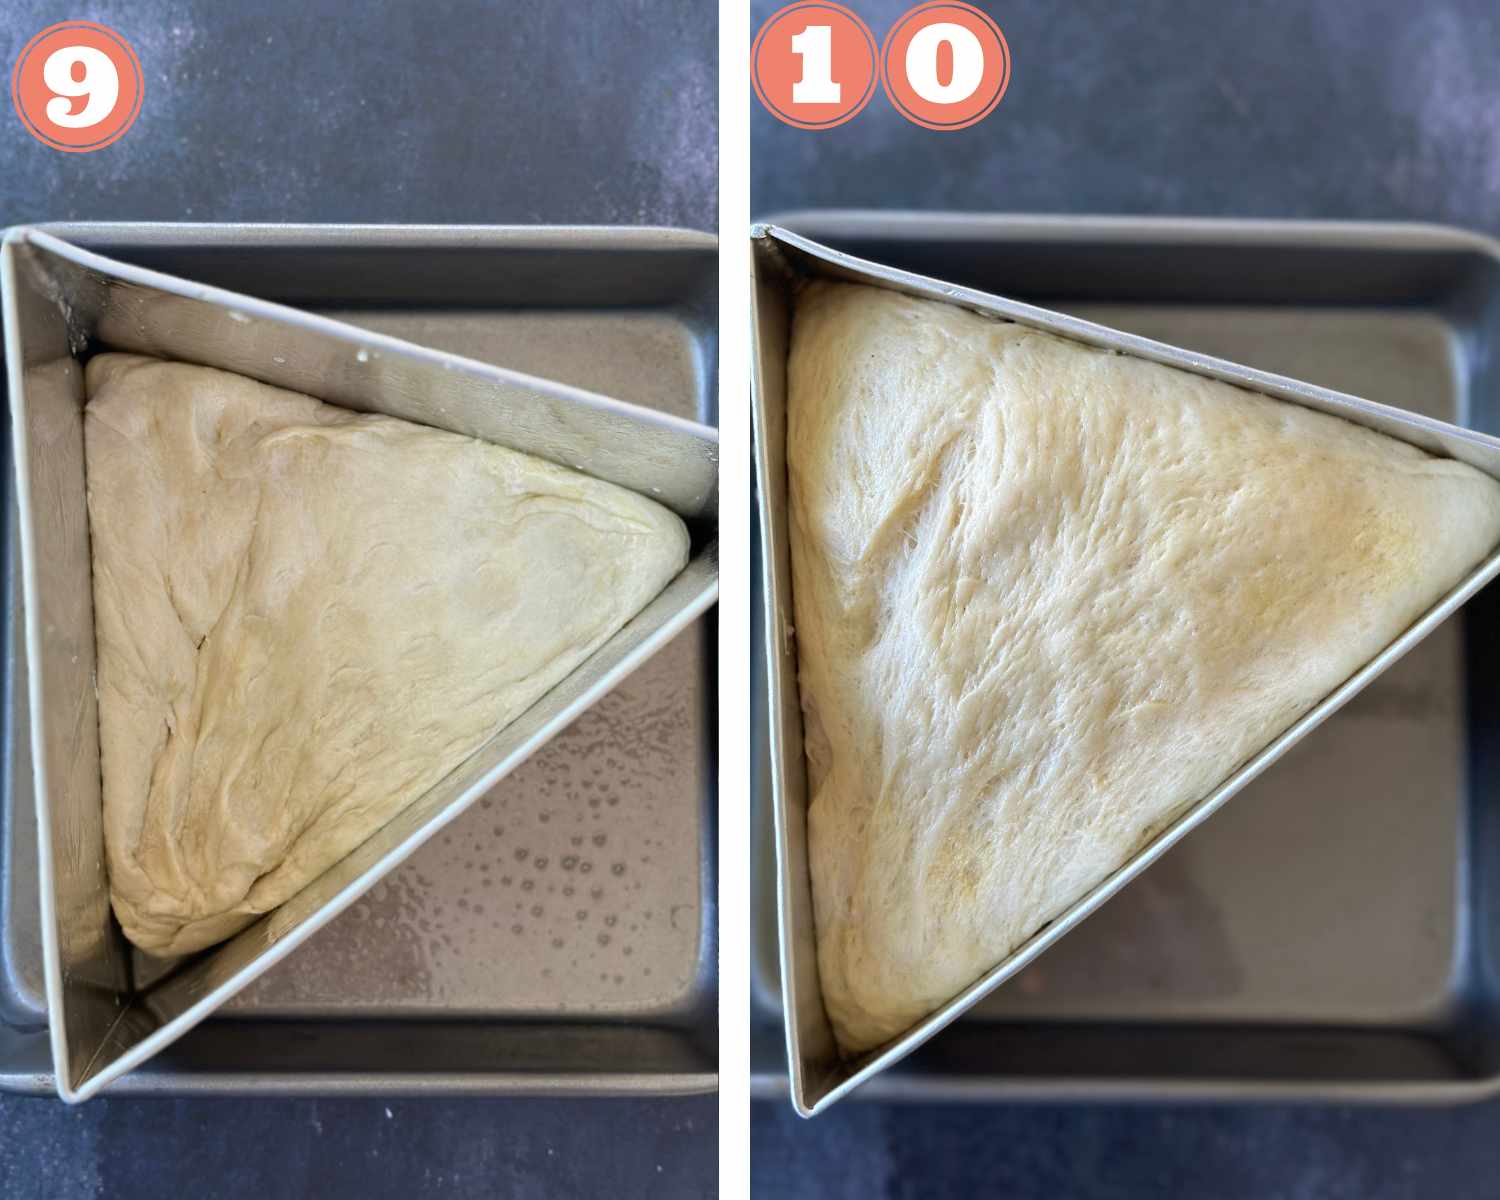 Collage steps to make triangular bread; transferring dough ball to mold and risen dough in mold, 